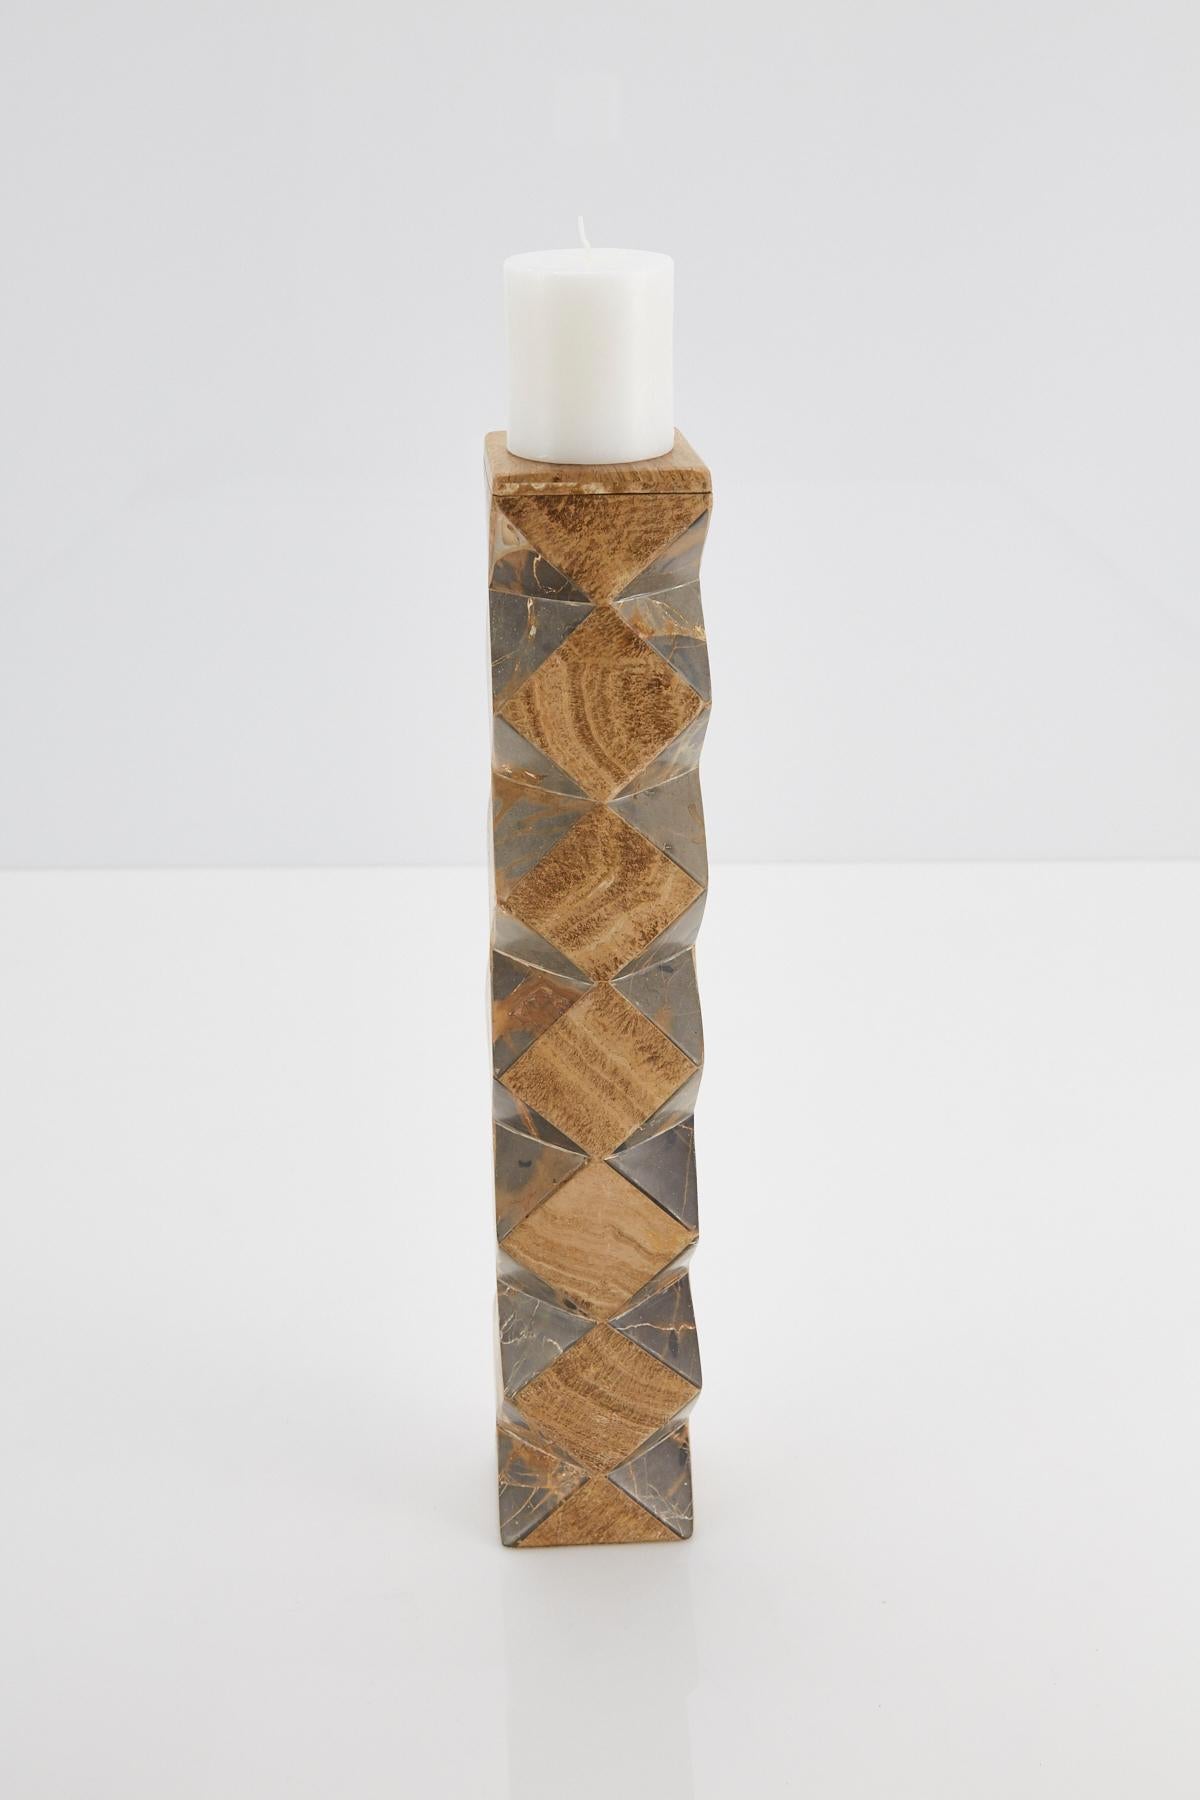 Tall Convertible Faceted Postmodern Tessellated Stone Candlestick or Vase, 1990s (Postmoderne) im Angebot